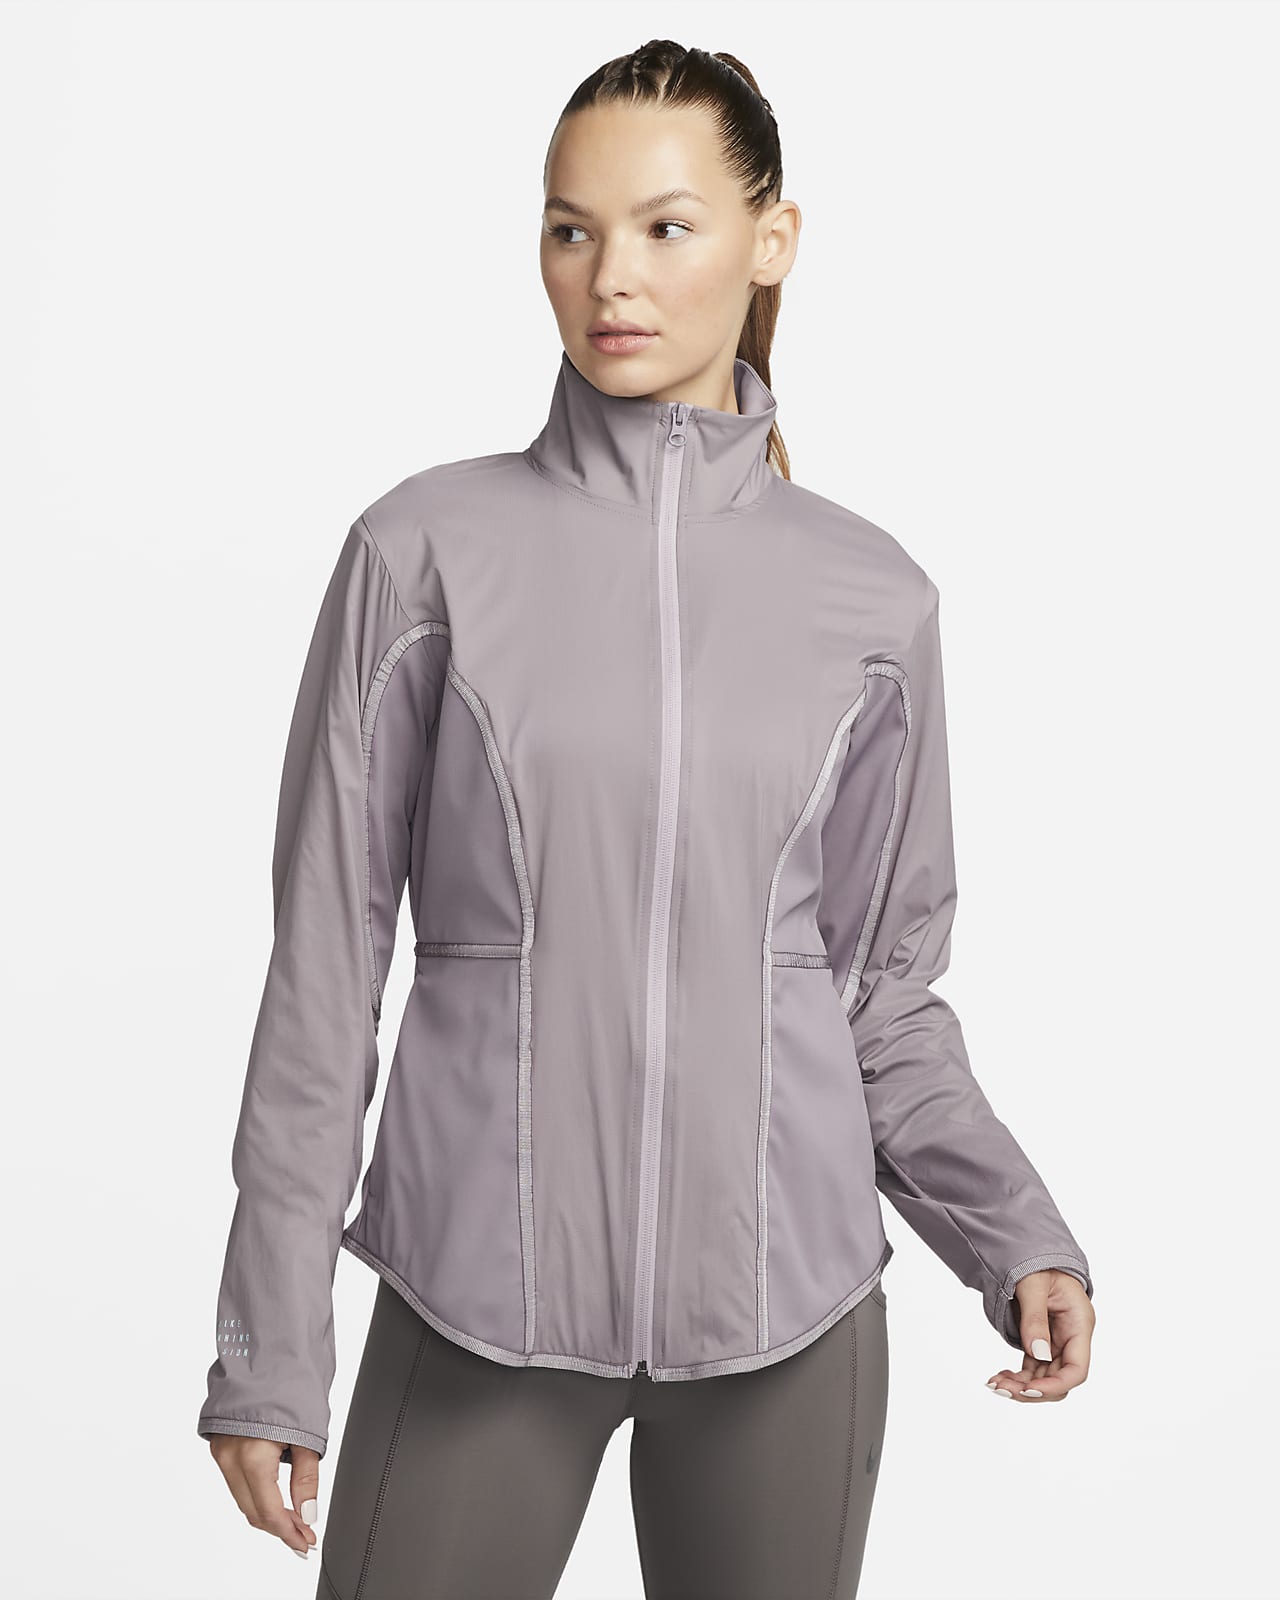 Nike Storm-FIT Run Division Women's Running Jacket